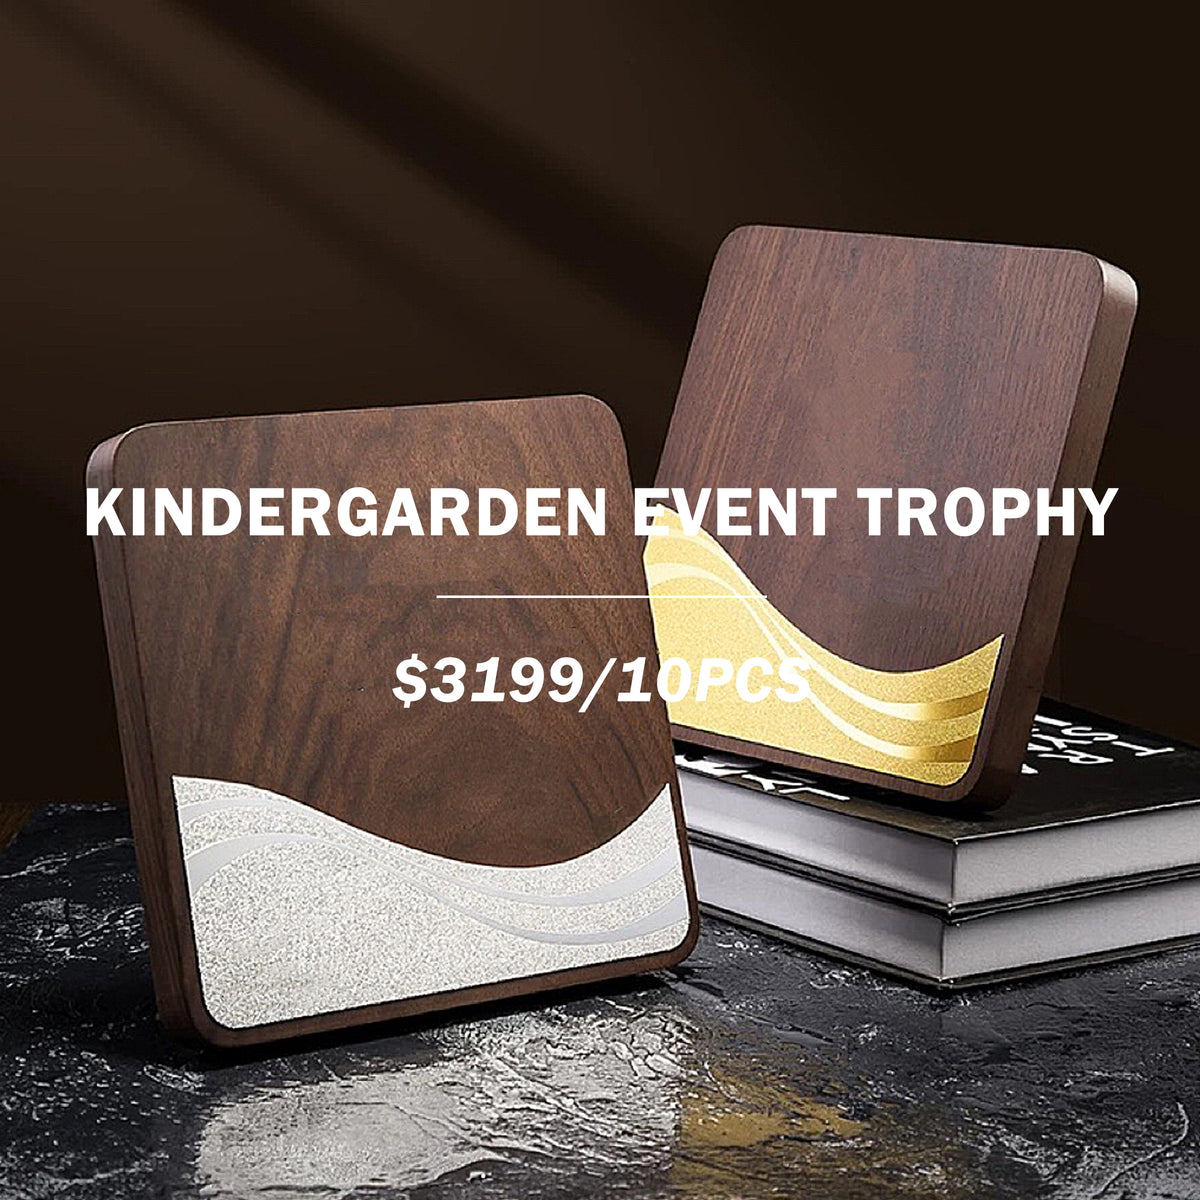 【KINDERGARDEN EVENT GIFTS】Wooden medals & medals printing logo x 10 pcs | 木質獎牌10件套訂製 獎牌訂製